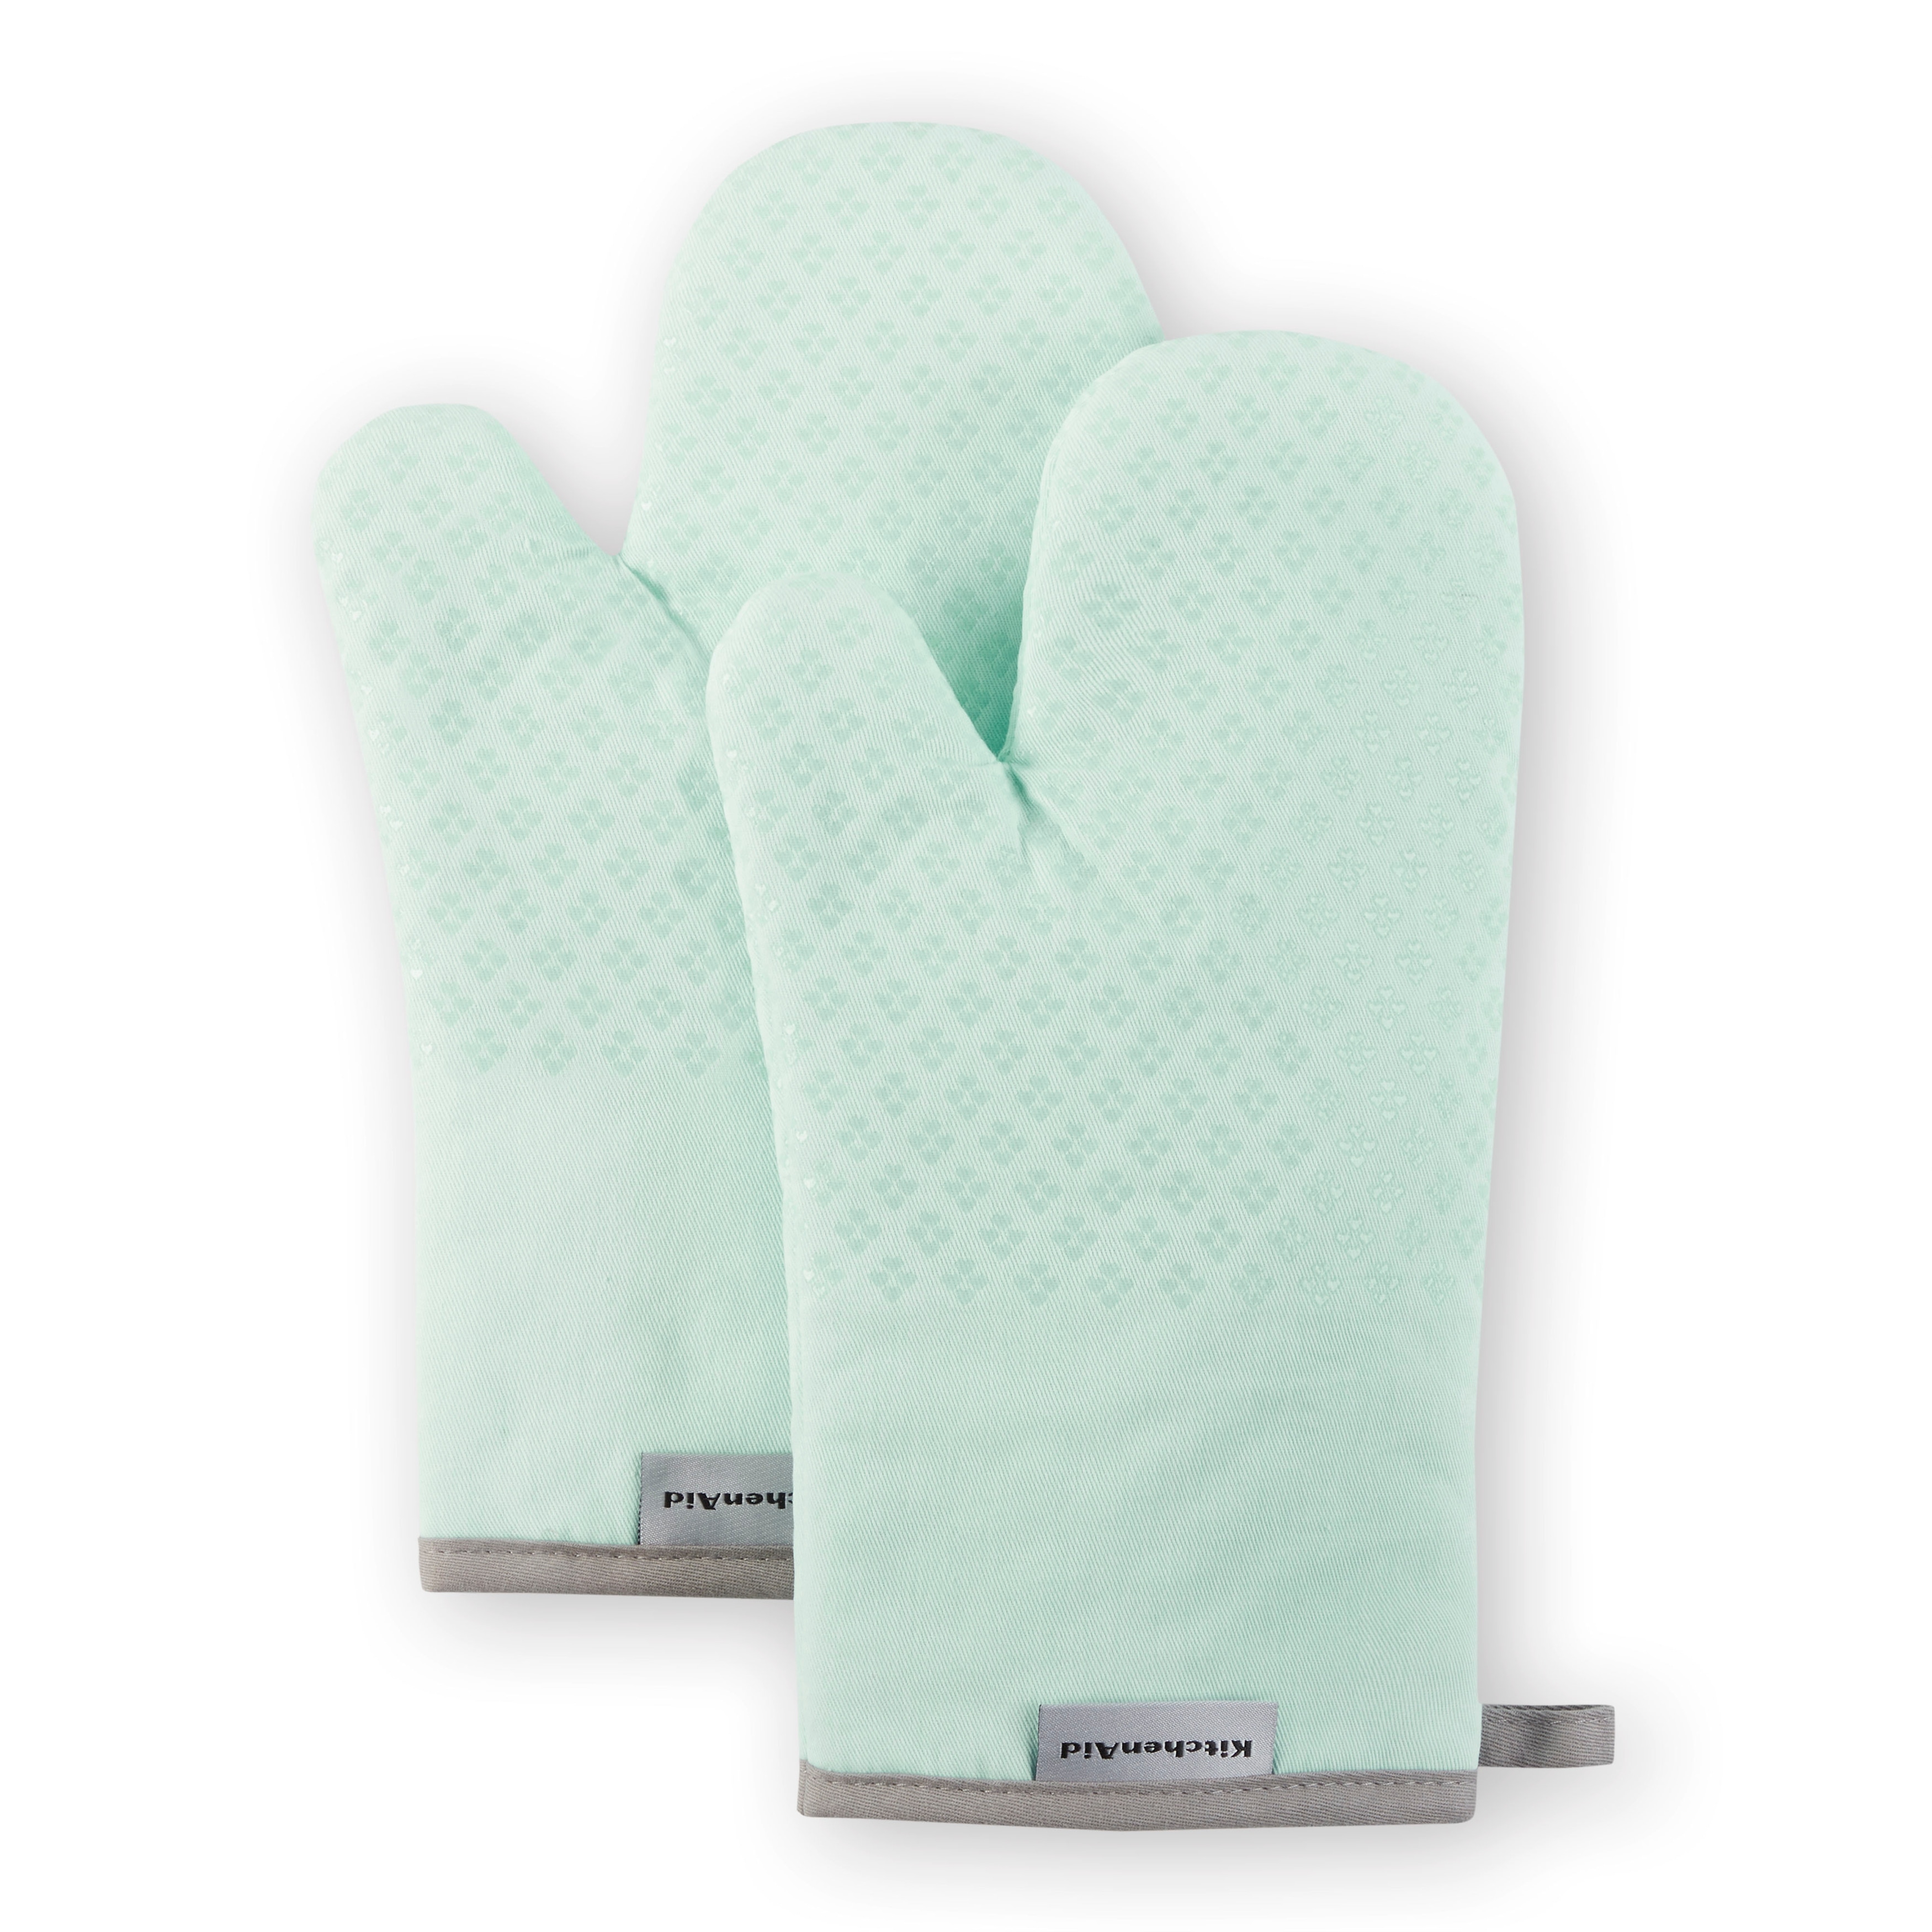 https://ak1.ostkcdn.com/images/products/is/images/direct/b4e073e3b29adf4b72f5cb477d3d2bc0fc9c8fb6/KitchenAid-Asteroid-Oven-Mitt-Set%2C-7%22x12.5%22%2C-2-Pack.jpg